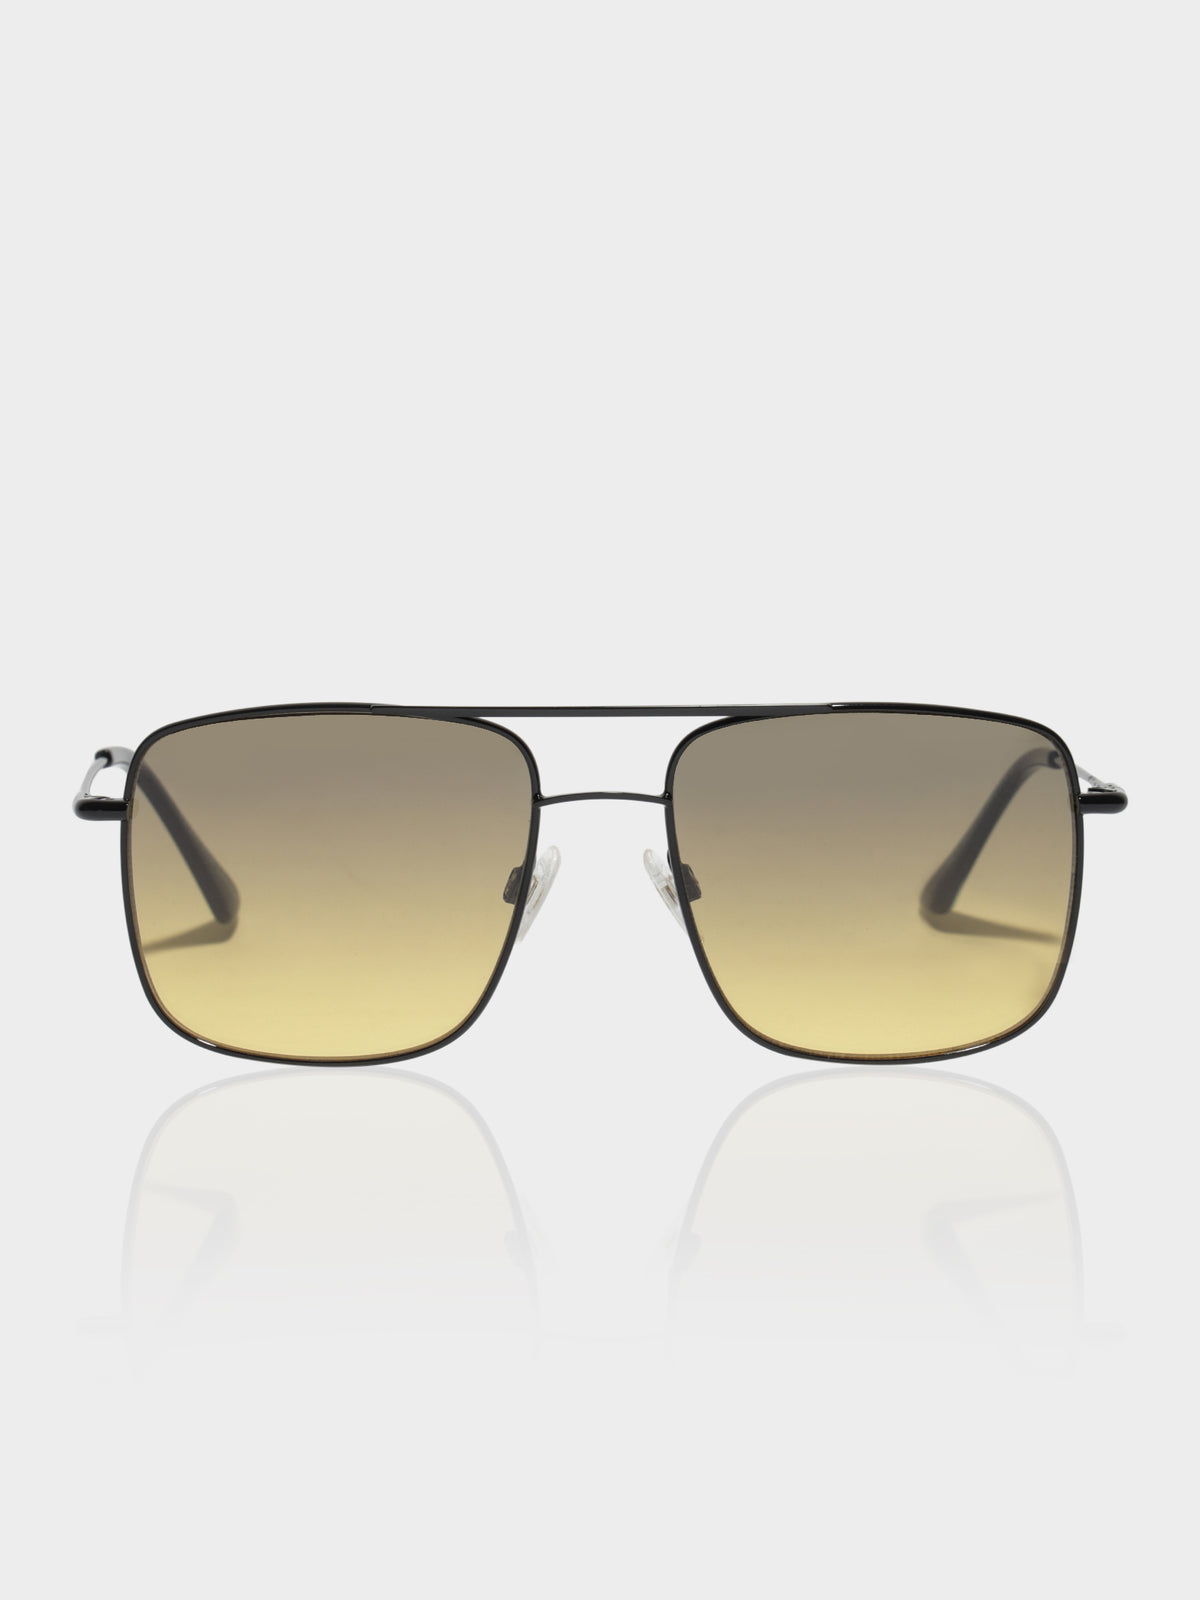 CL6862 Reaction Sunglasses in Black Smoke